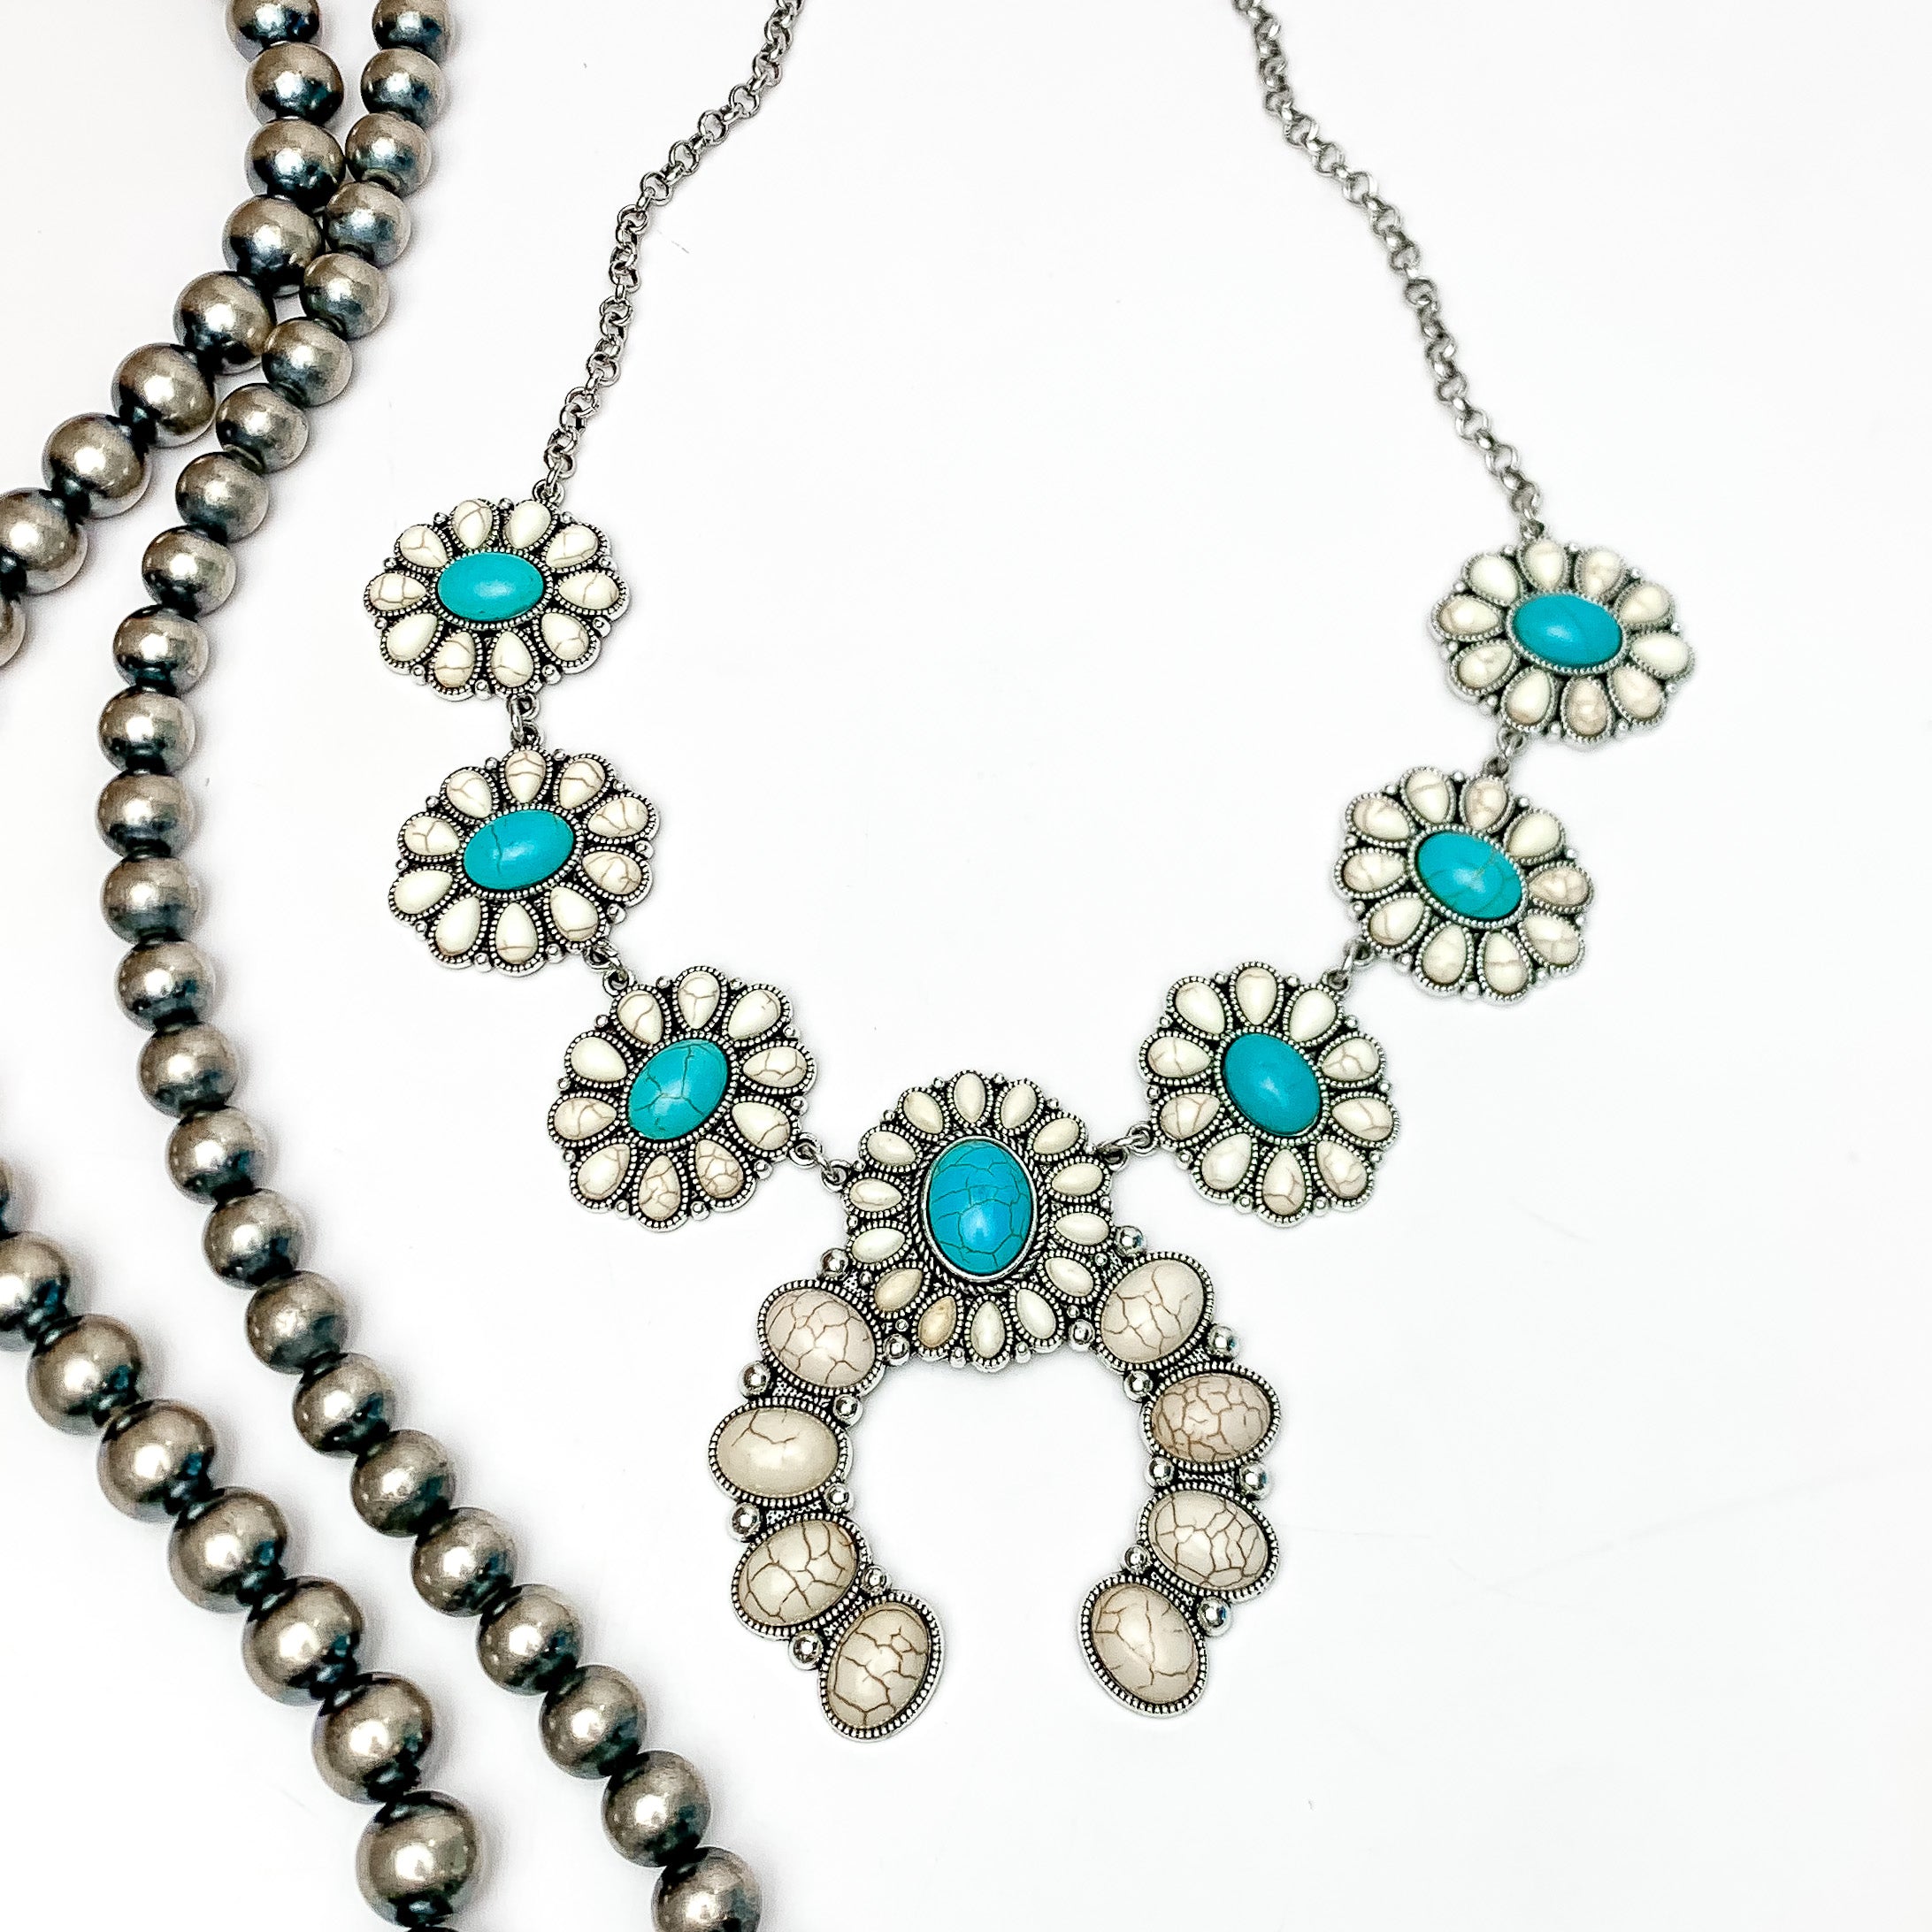 The Western Way Squash Blossom Necklace in Turquoise Blue and Ivory. Pictured on a white background with Navajo beads on the left.